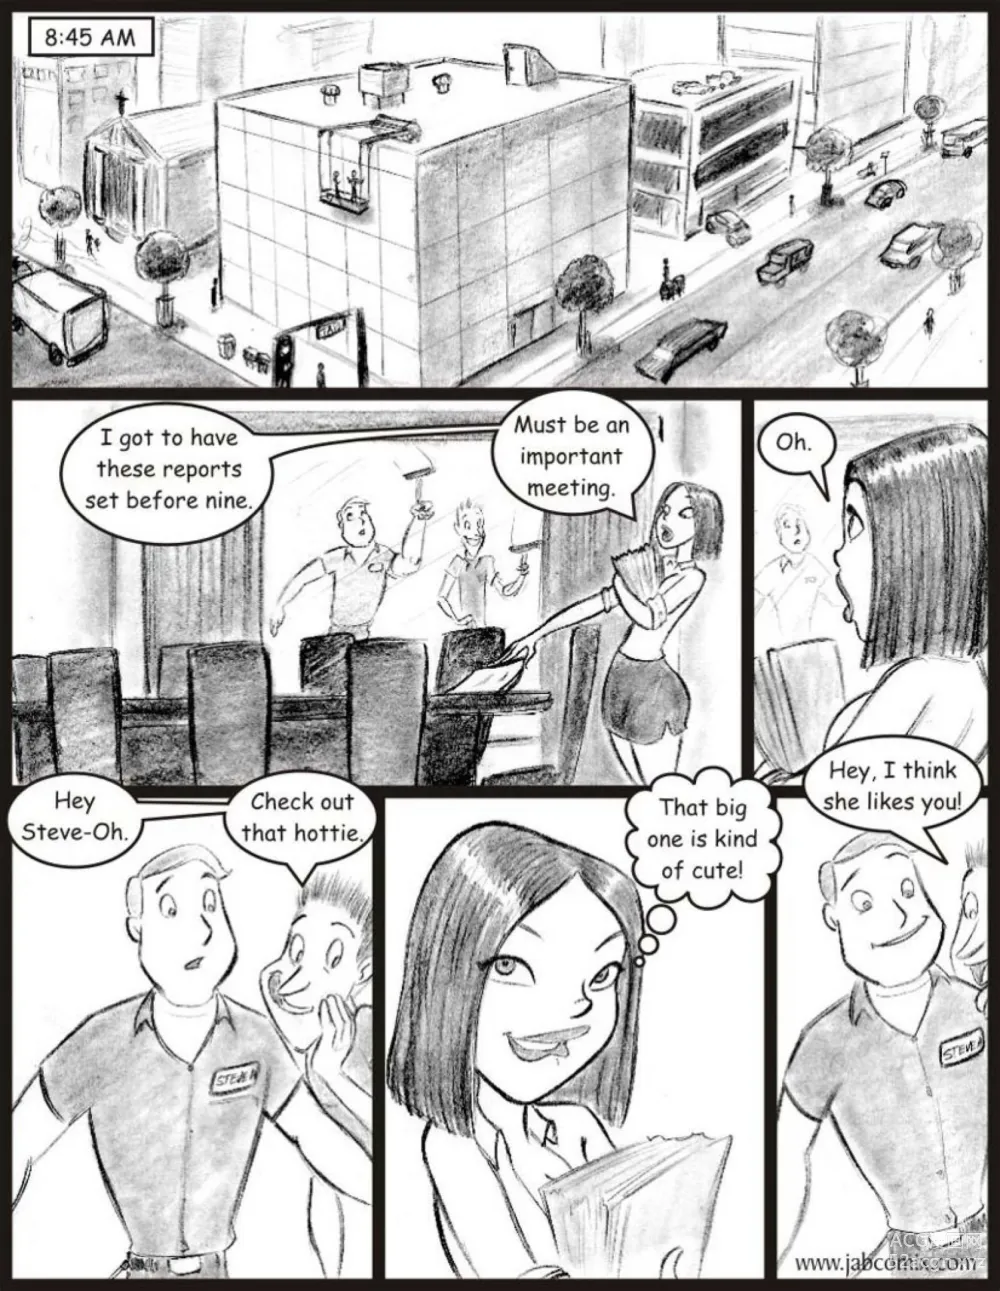 Ay Papi - Kim Sets Up a Meeting - Chapter 8 - Western Porn Comics Western  Adult Comix (Page 2)